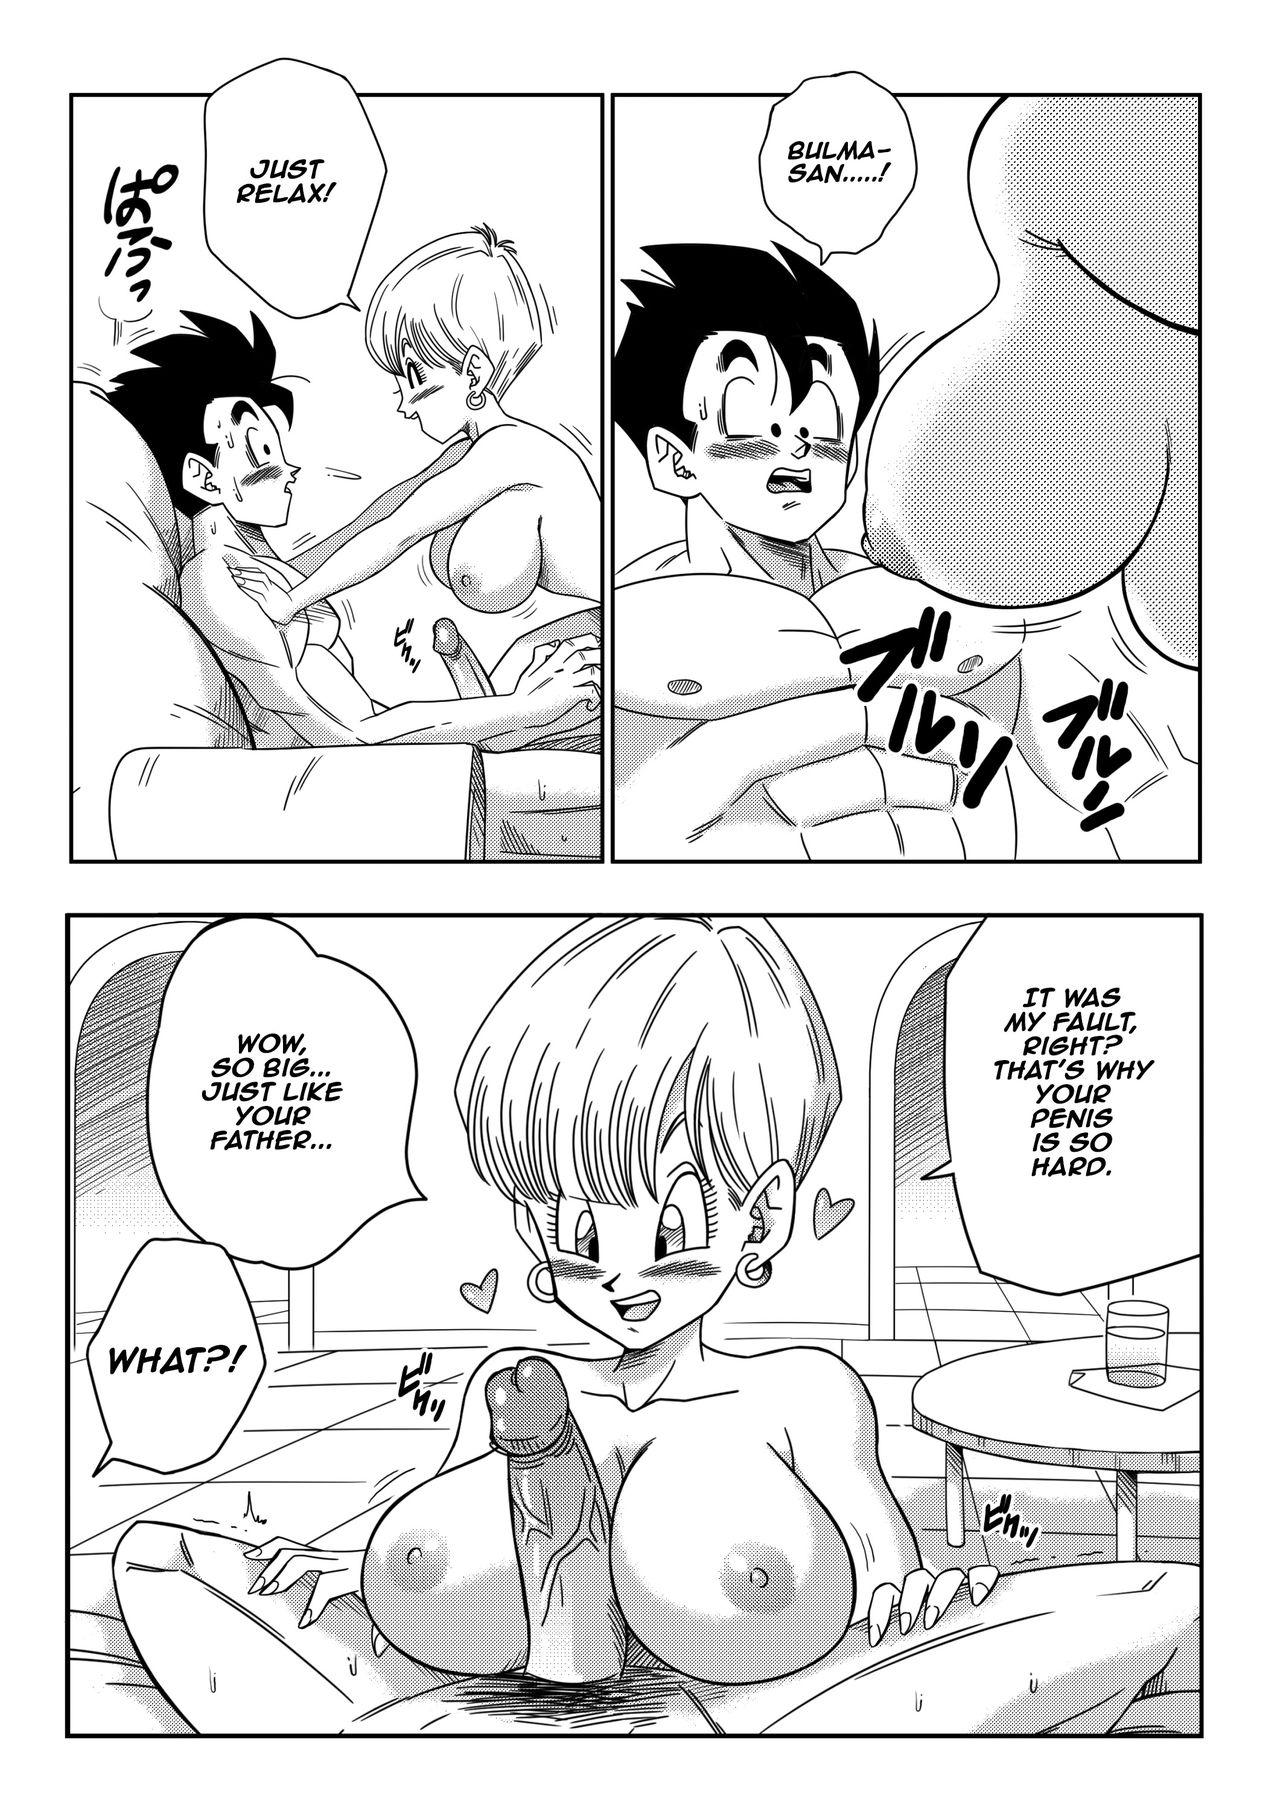 Love Making LOVE TRIANGLE Z PART 3 - Dragon ball z Mom - Page 6